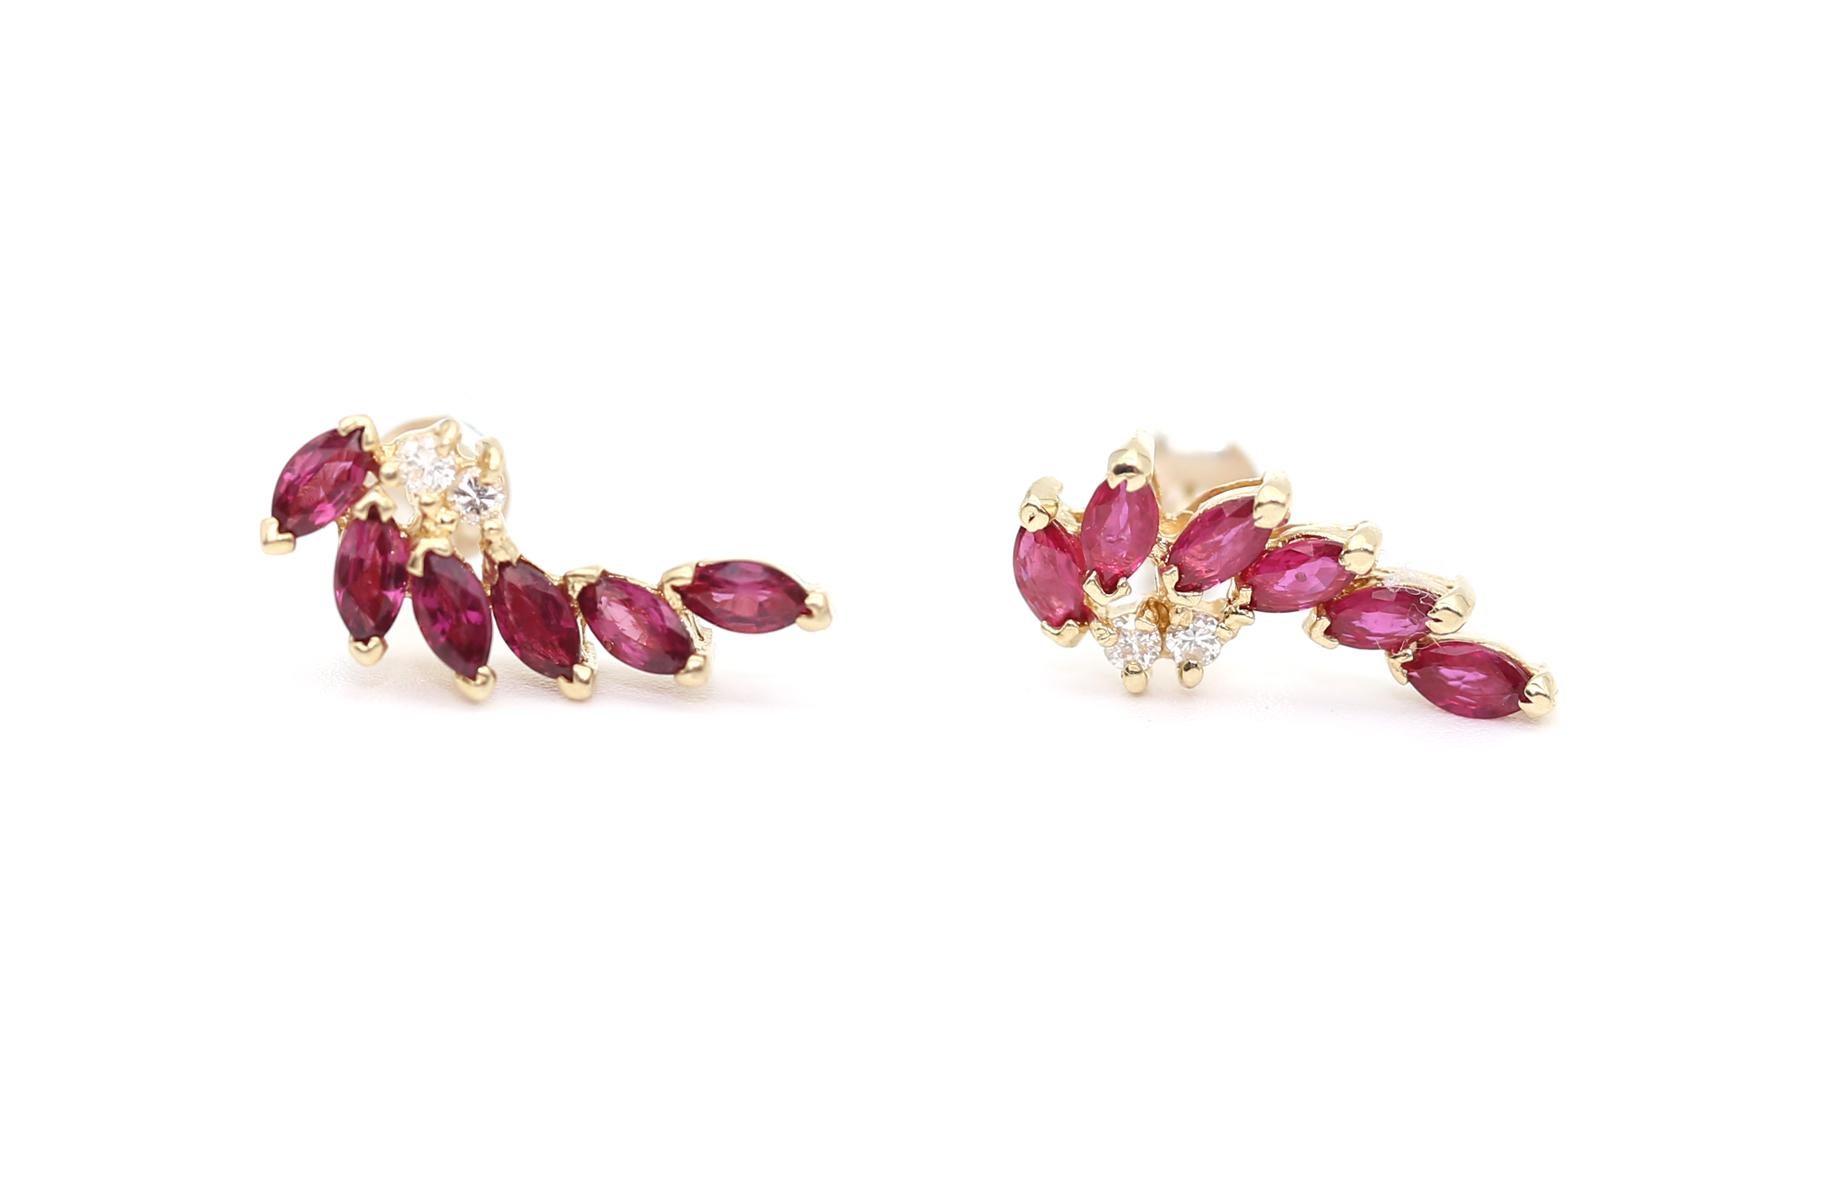 Rubies Diamonds 18K Yellow Gold.
Each earring comprises 6 marquise-cut Rubies. The design of the earring follows the line of the ear, underlining the shape. 2 fine round cut Diamonds. The lock is invisible from the outside so it appears as if the